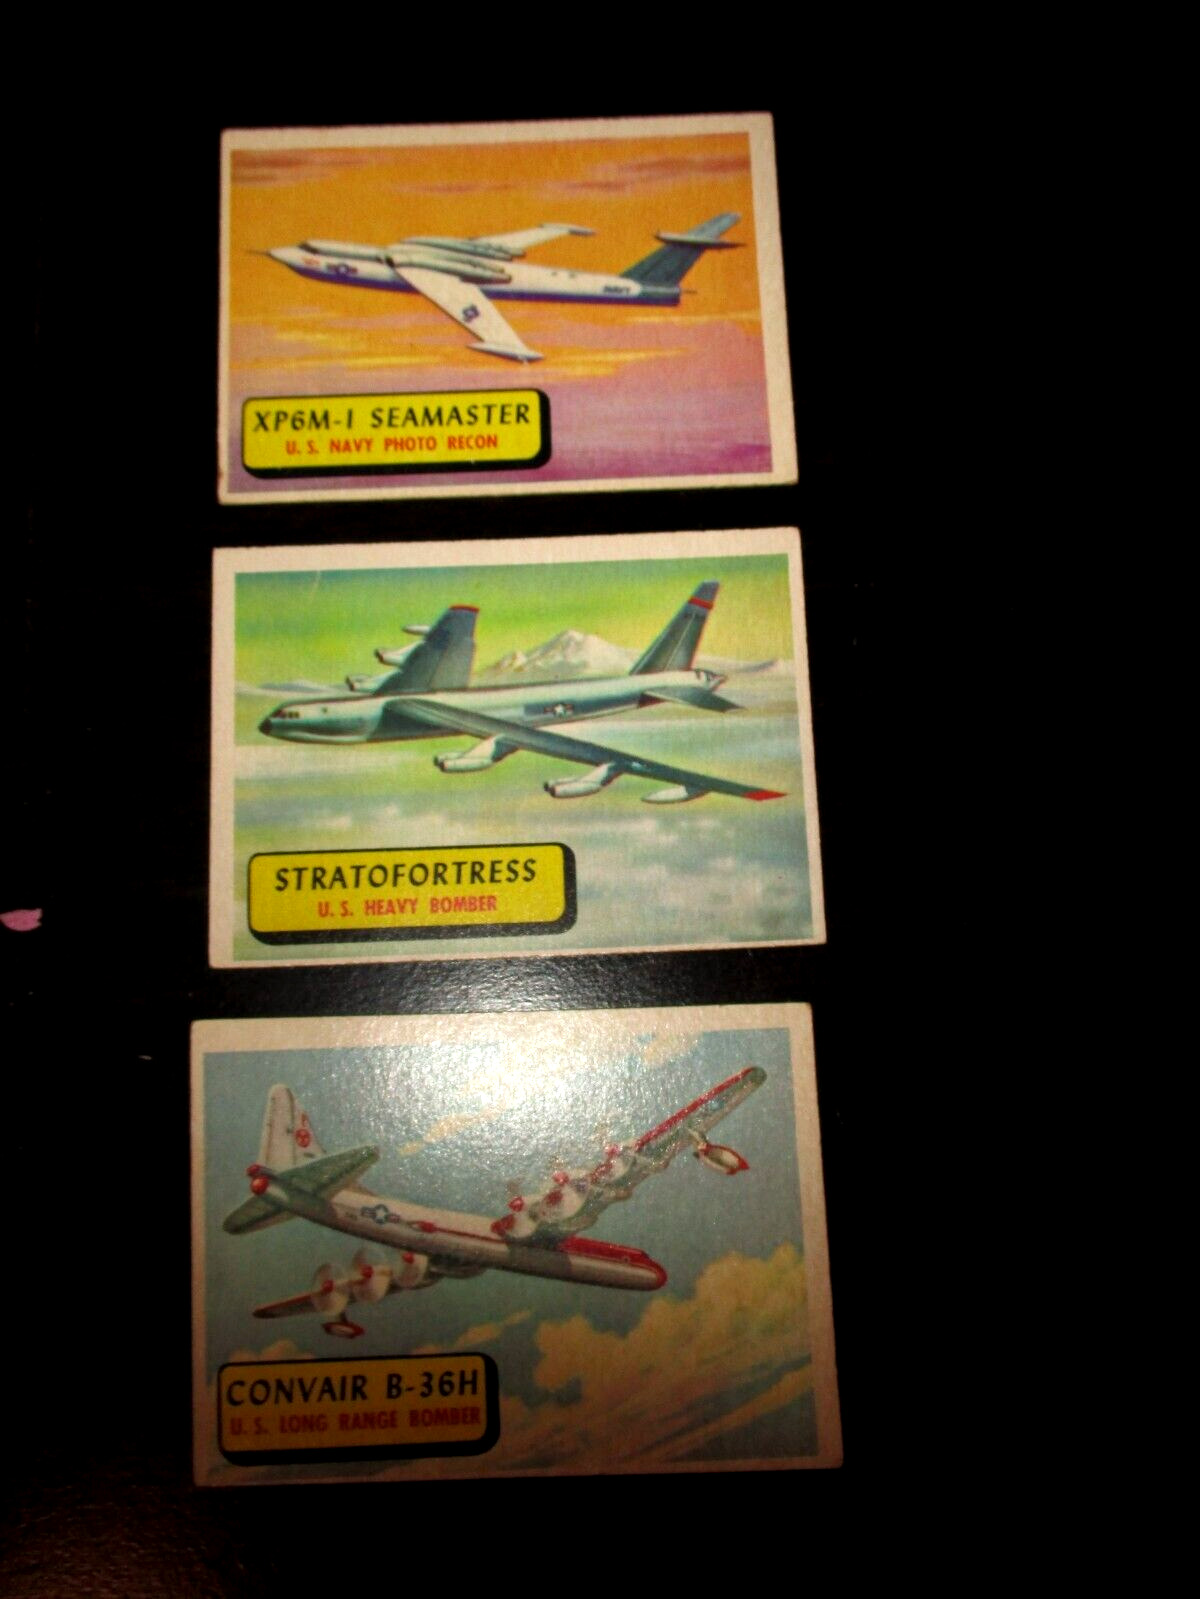 (3) VINTAGE 1957 Topps Planes of the World Cards-#7-B-52, #5-B-36 & #11-XP6M-1